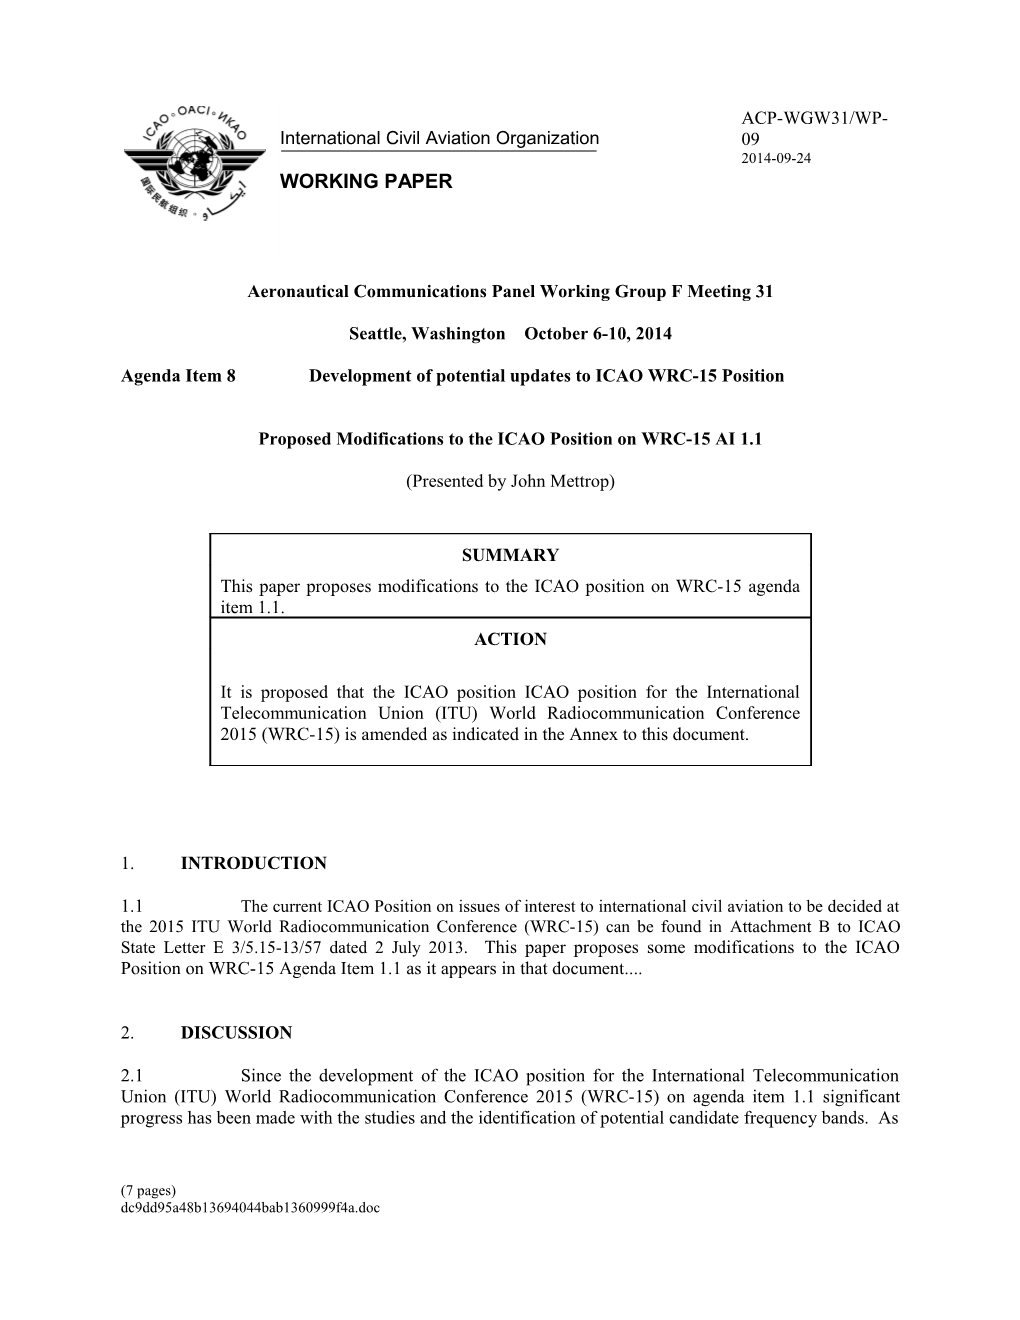 Proposed Modifications to the ICAO Position on WRC-15 AI 1.1